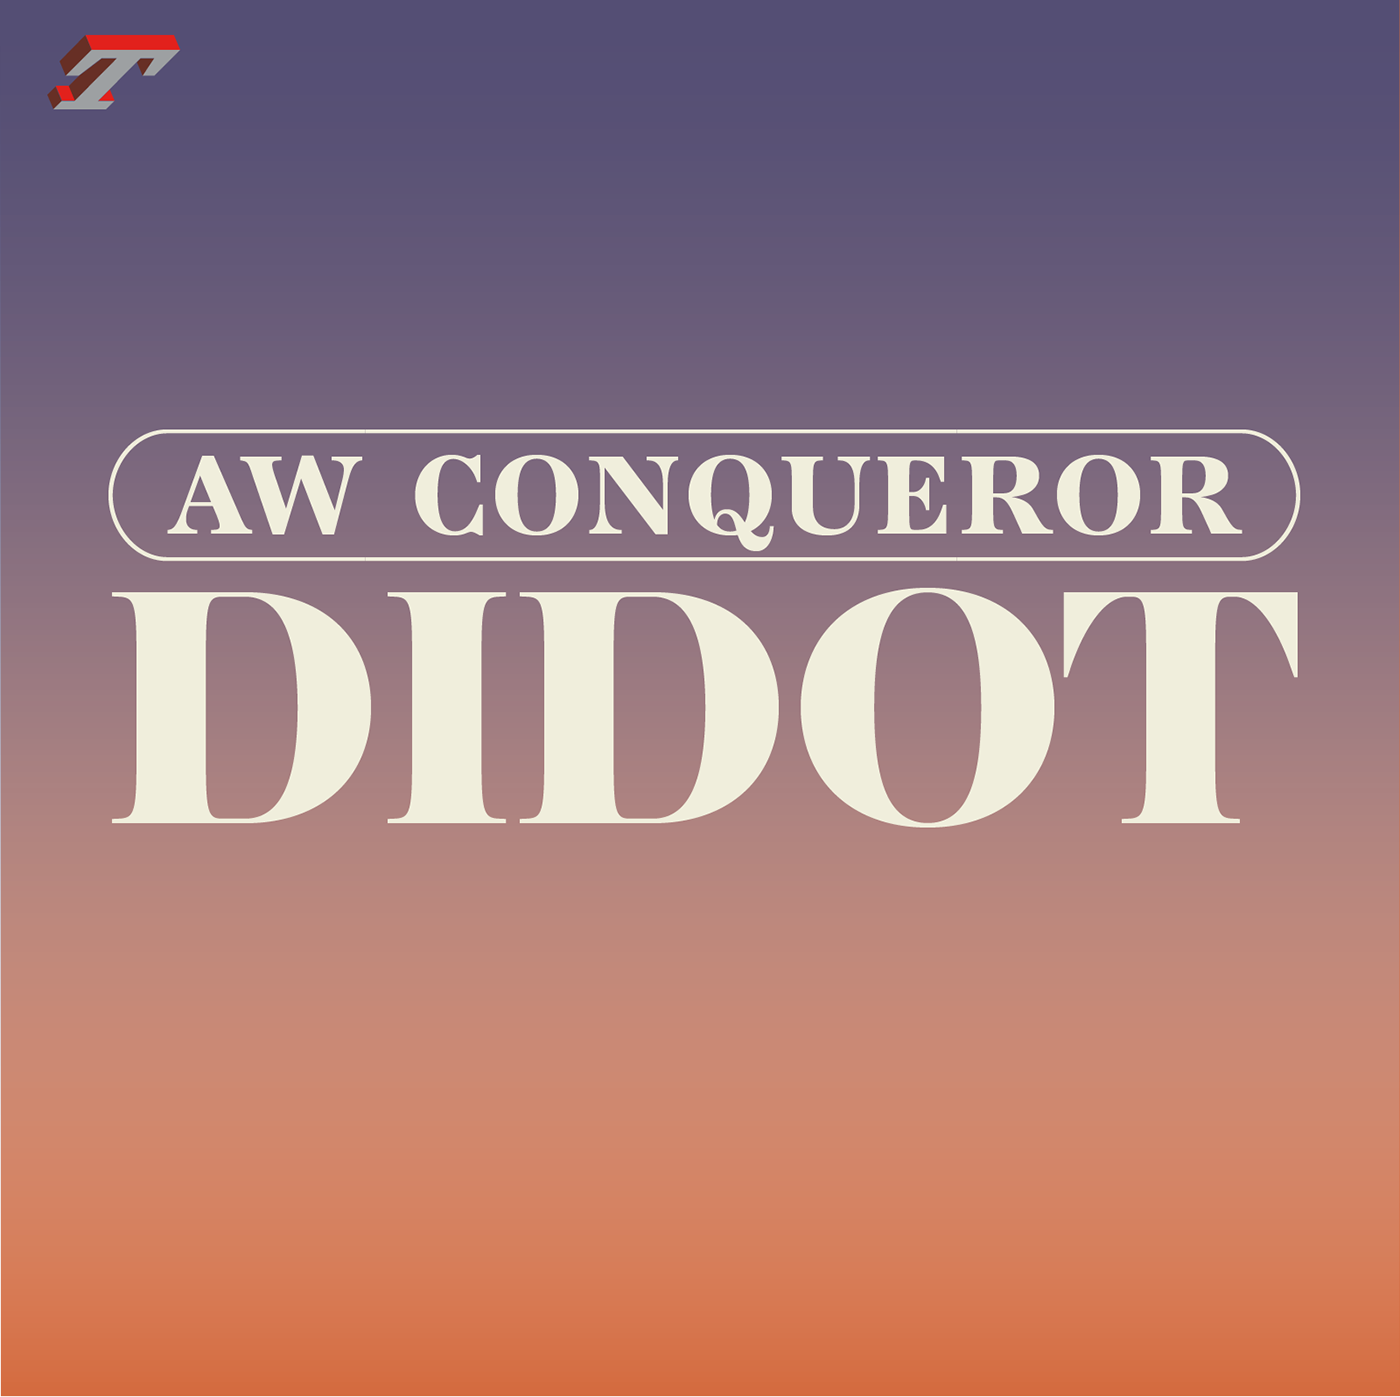 Aw conqueror didot free download